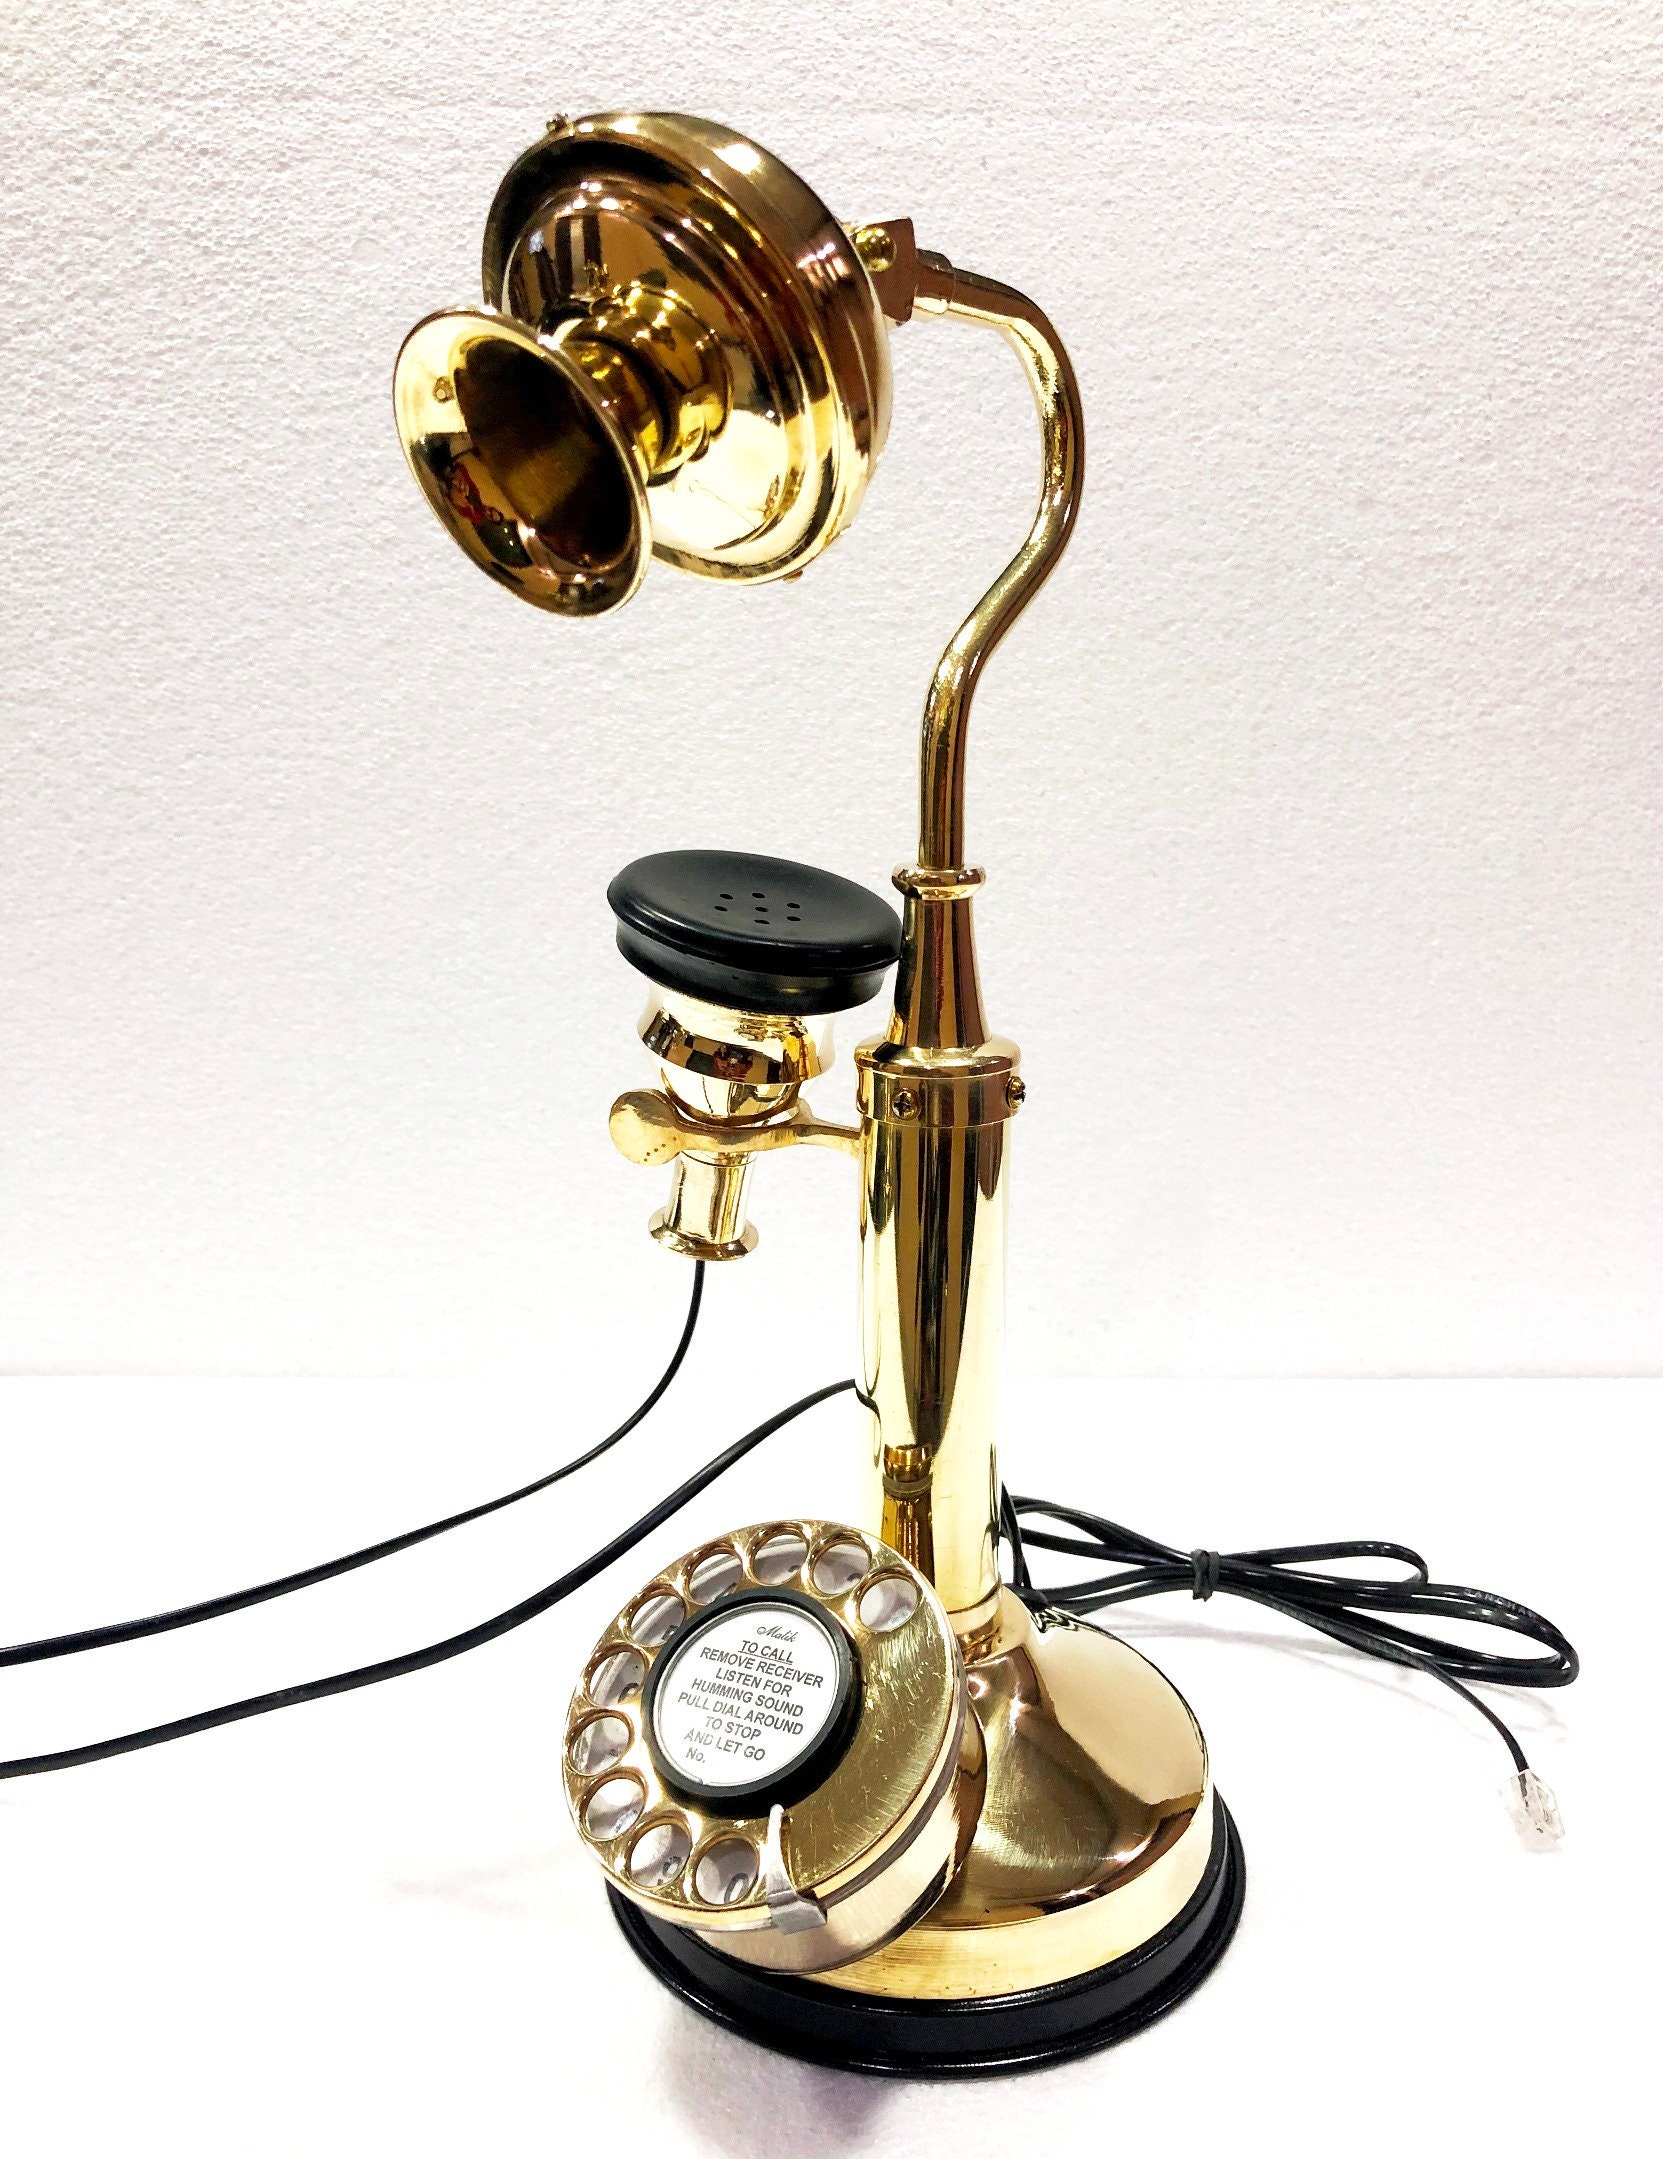 Antique Brass American Landline Telephone Vintage Rotary Dial Candlestick Phone 